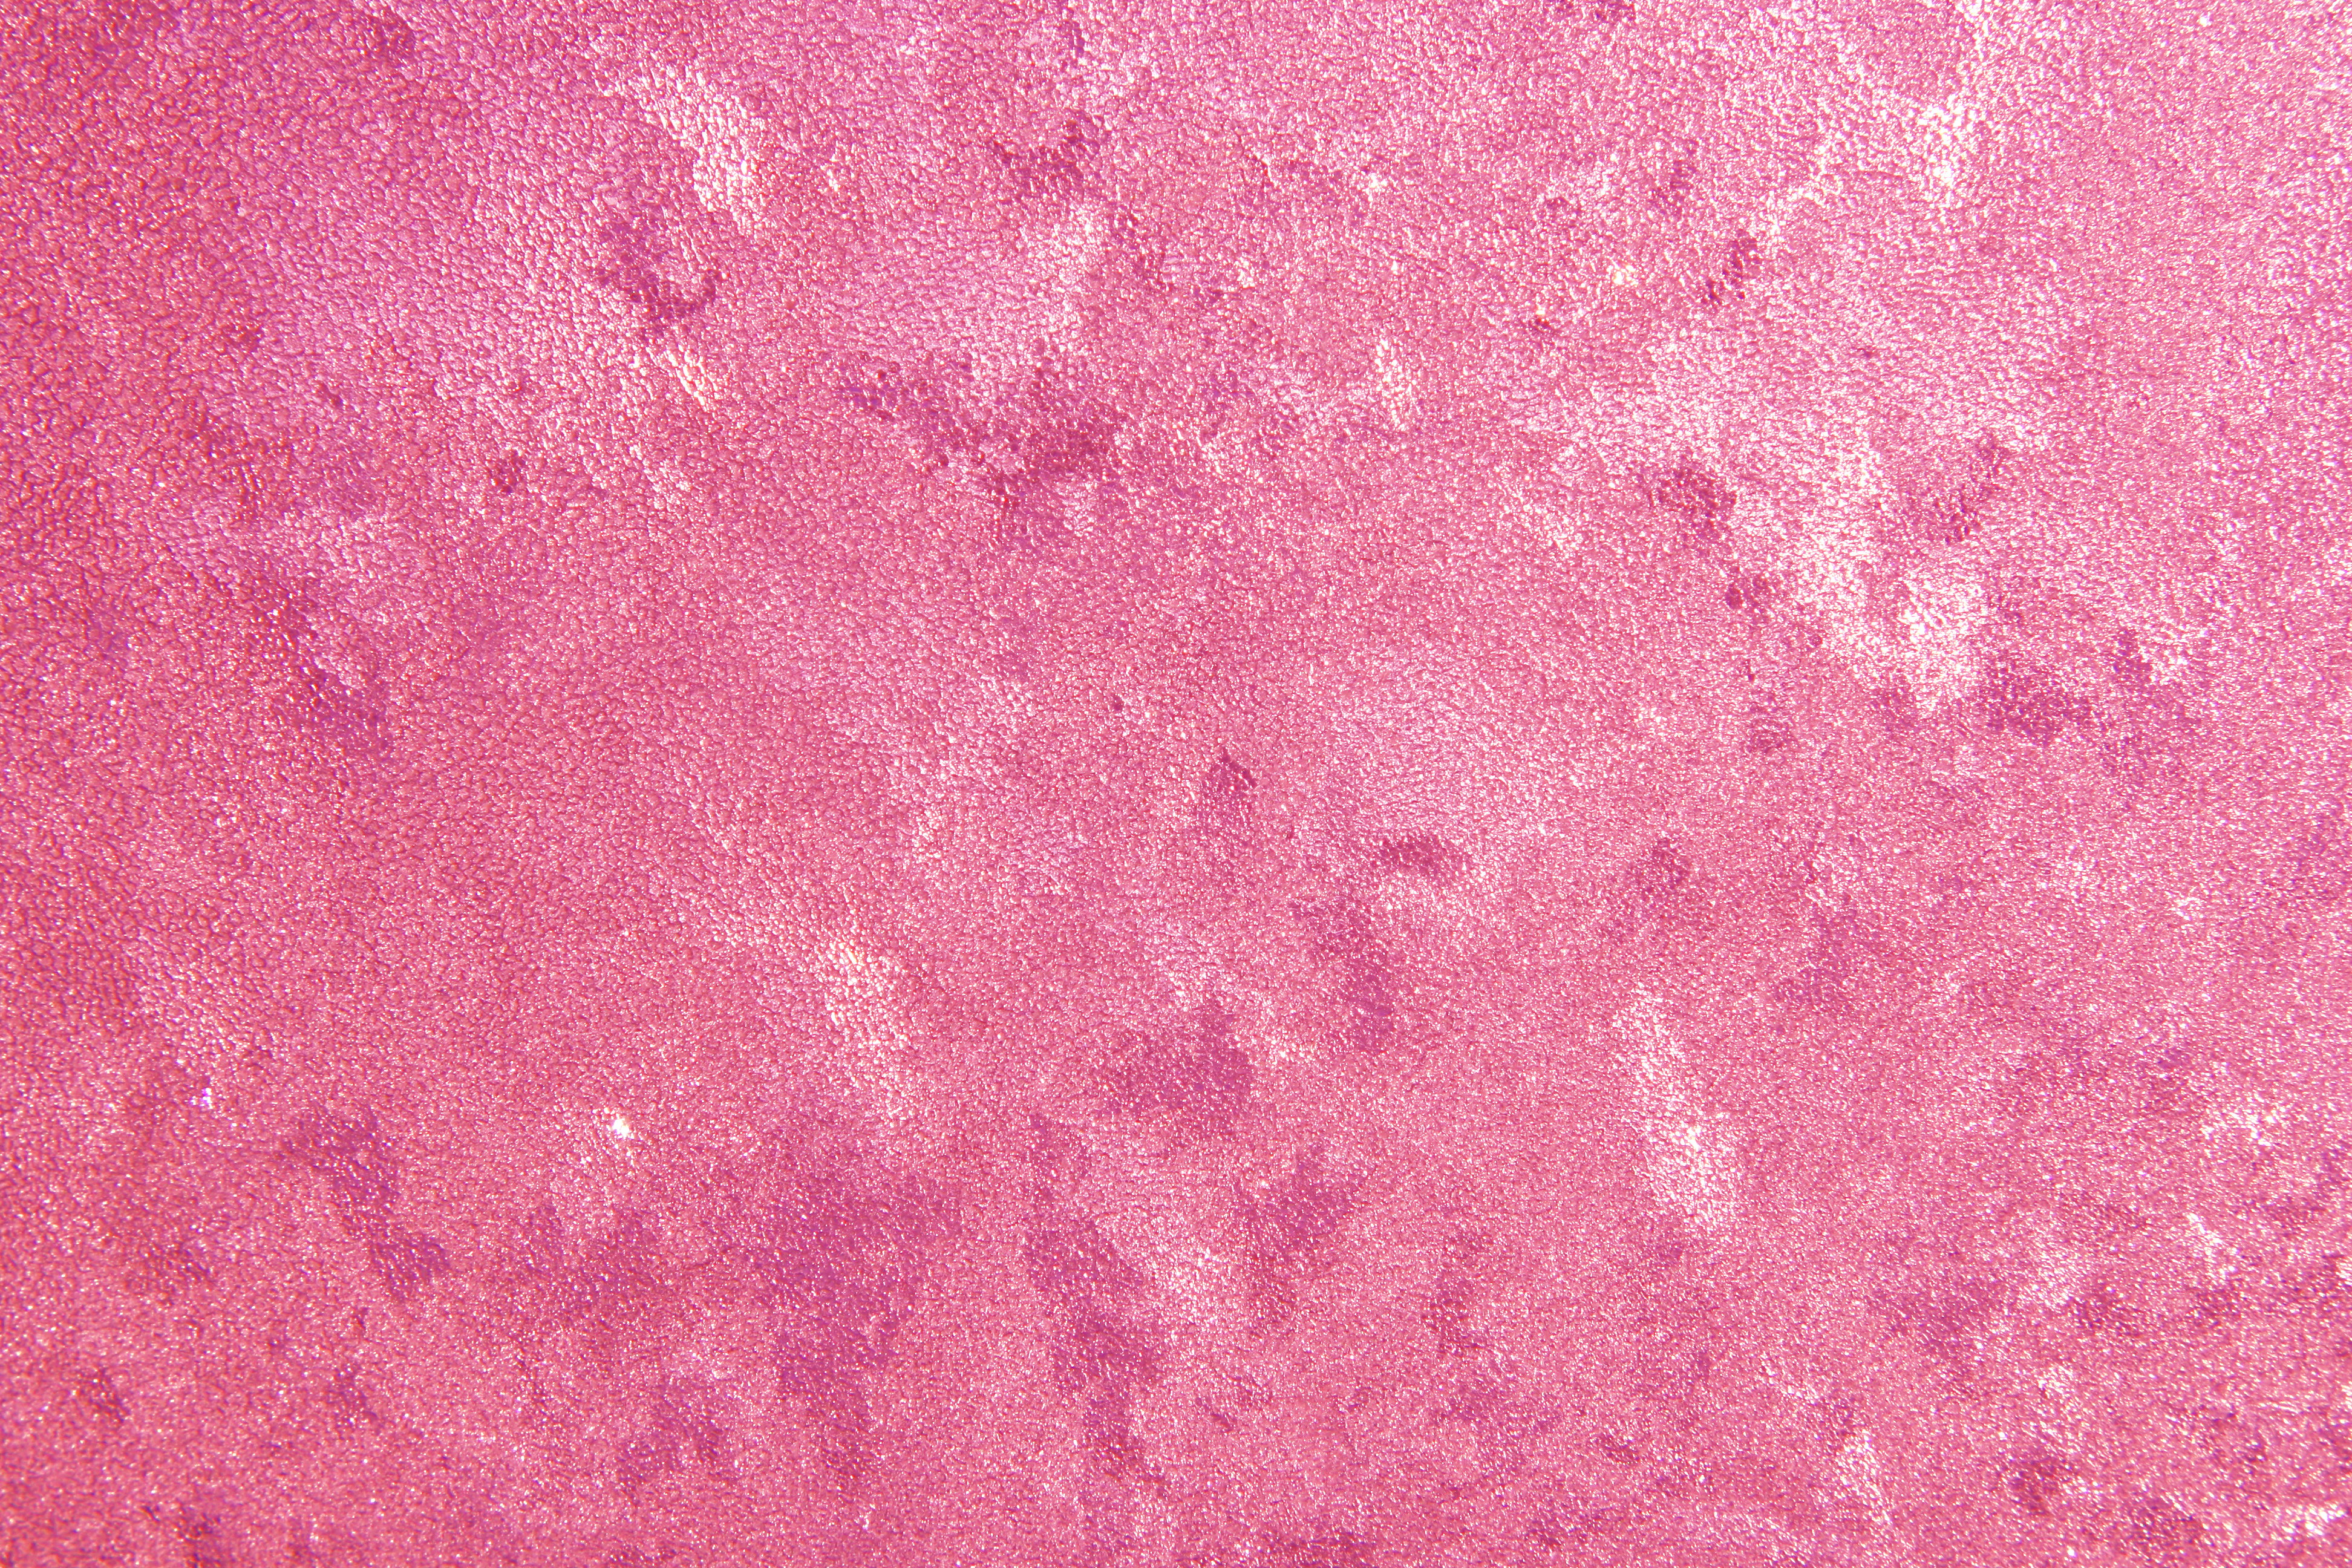 Free high resolution close up pink colorized photo of frost or ice crystals...